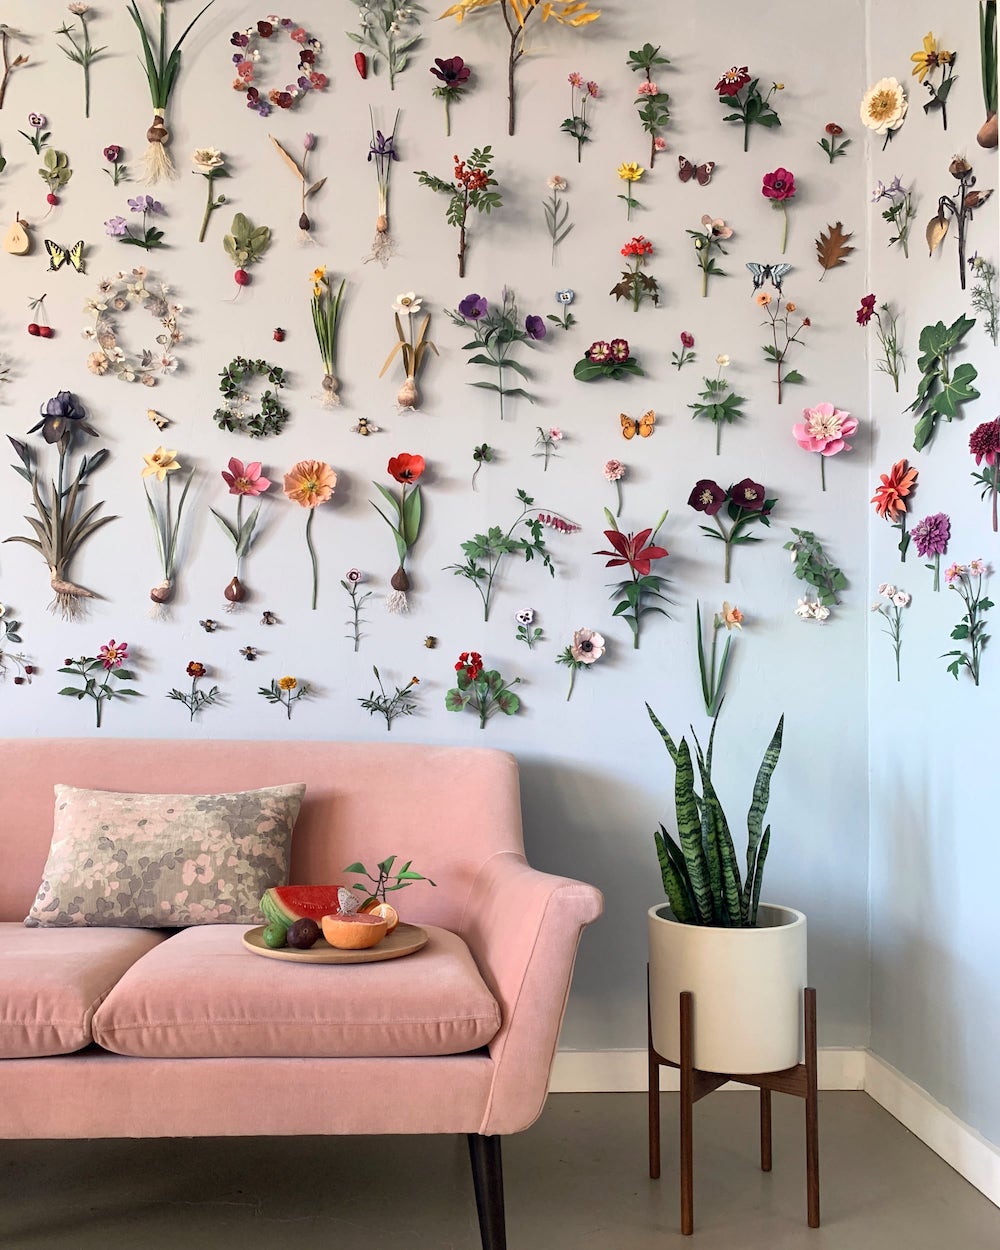 Woodlucker Re-Creates the Botanical World in Paper Ann Wood Paper Flowers